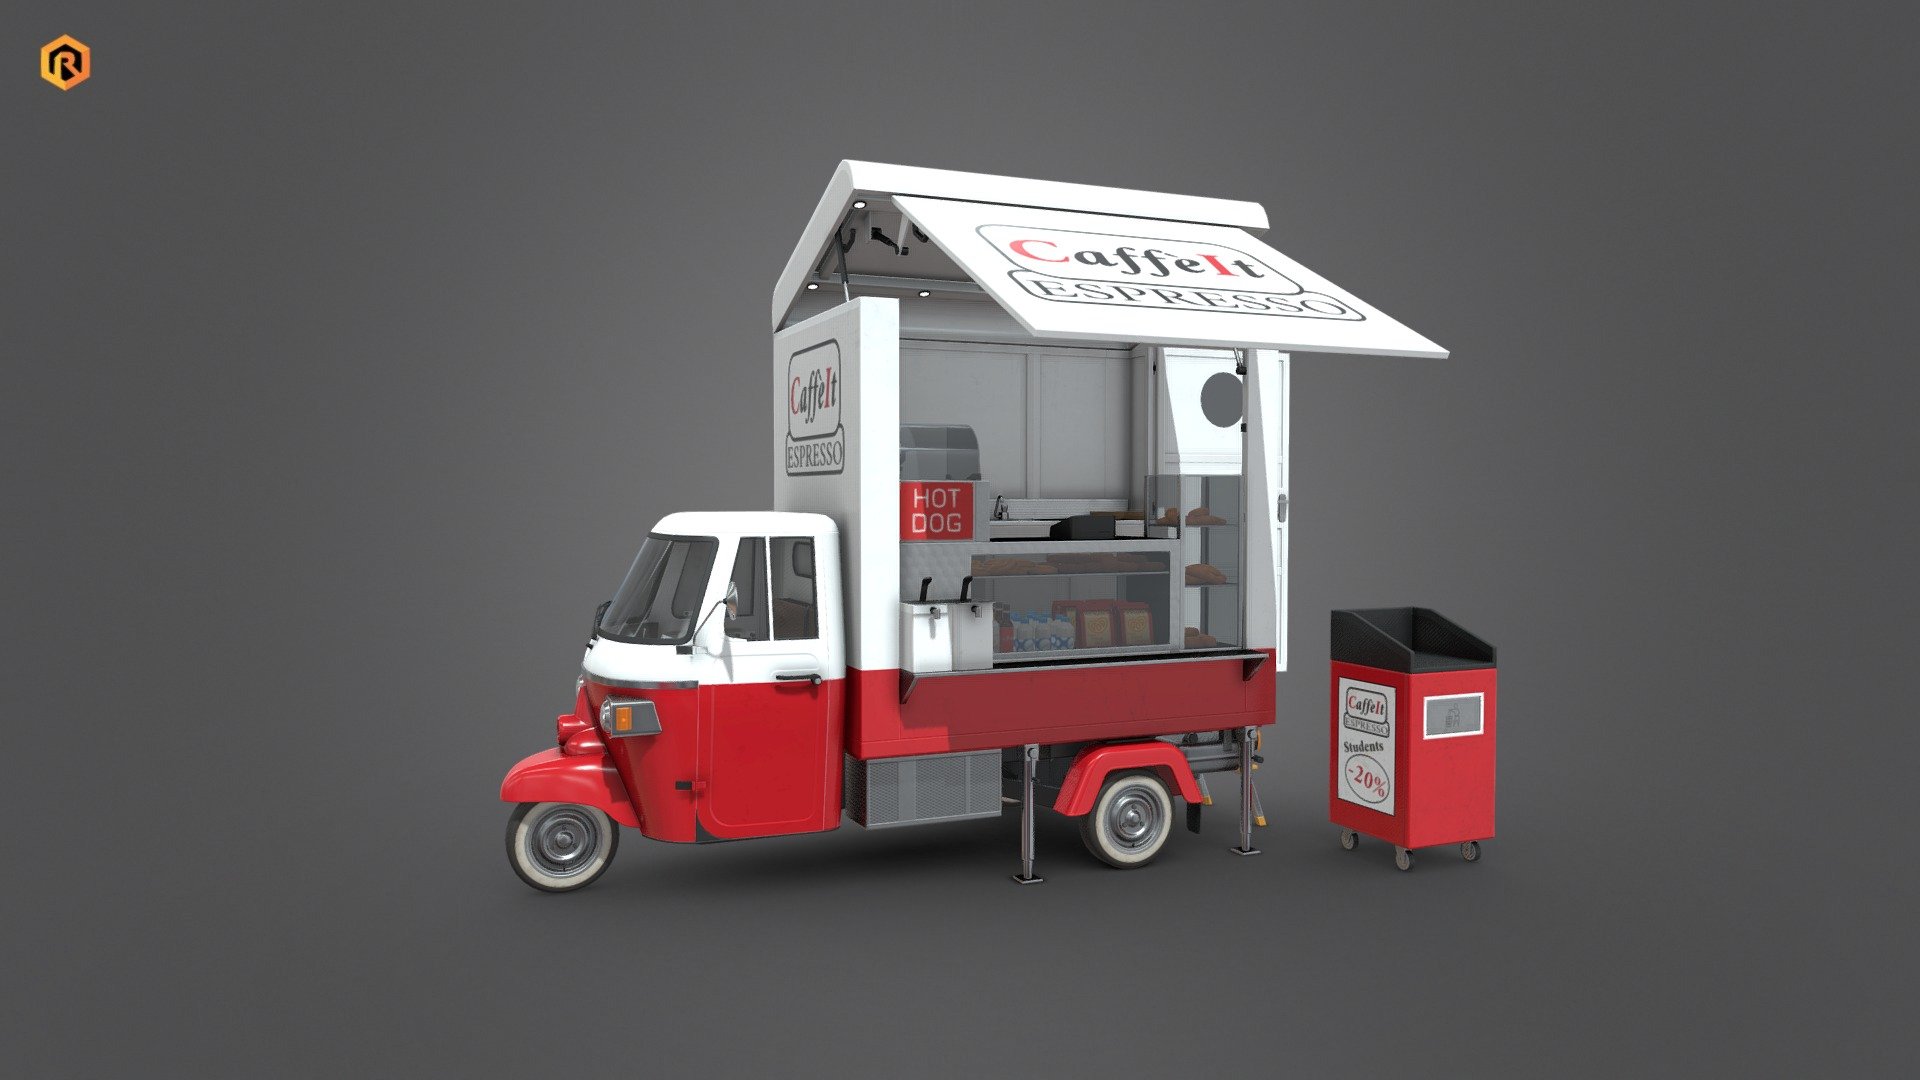 PBR low-poly 3D model of Food Cart with an additional bin. 

There is open and closed trailer version of the model included.  

This Food Cart is coffee shop themed but you can also find other theme food carts in my store.

This model is best for use in games and other VR/AR, real-time applications such as Unity or Unreal Engine. It can also be rendered in Blender (ex Cycles) or Vray as the model is equipped with all required PBR textures.  

Technical details:




6 PBR textures sets

 (Main Body, Alpha, Emission, Trailer Main, Trailer Alpha, Trailer Emission) 

35665 Triangles

The model is divided into few objects: main body, wheels, doors, steering wheel, two trailer types (open and close) etc. 

Lot of additional file formats included (Blender, Unity, Maya etc.)  

More file formats are available in additional zip file on product page (See all files)

Please feel free to contact me if you have any questions or need any support for this asset.

Support e-mail: support@rescue3d.com - Food Truck - Buy Royalty Free 3D model by Rescue3D Assets (@rescue3d) 3d model